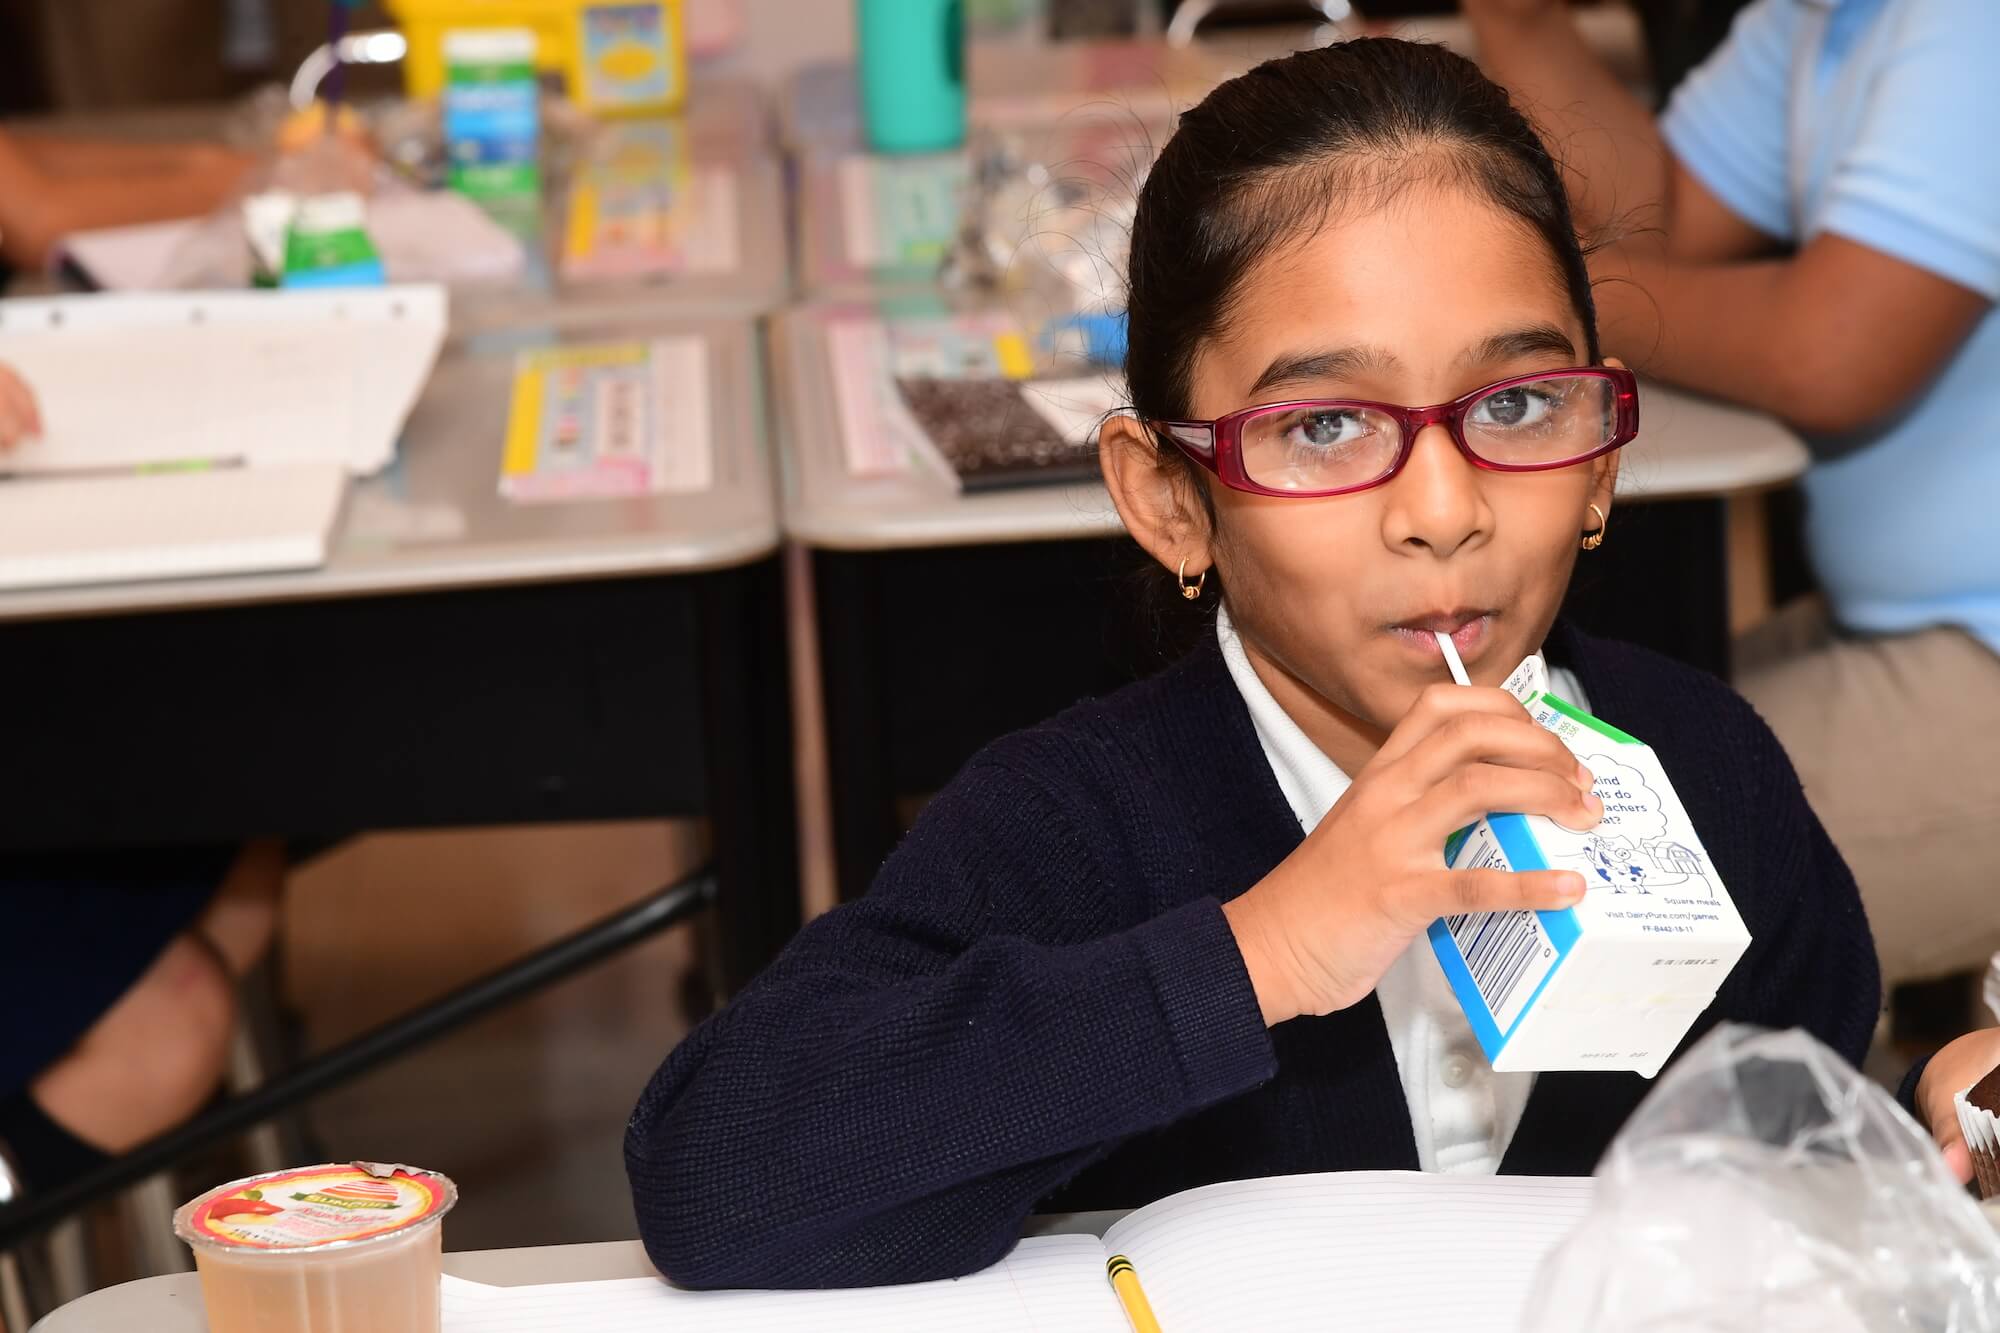 A girl wearing glasses drinks a carton of milk as part of her school lunch